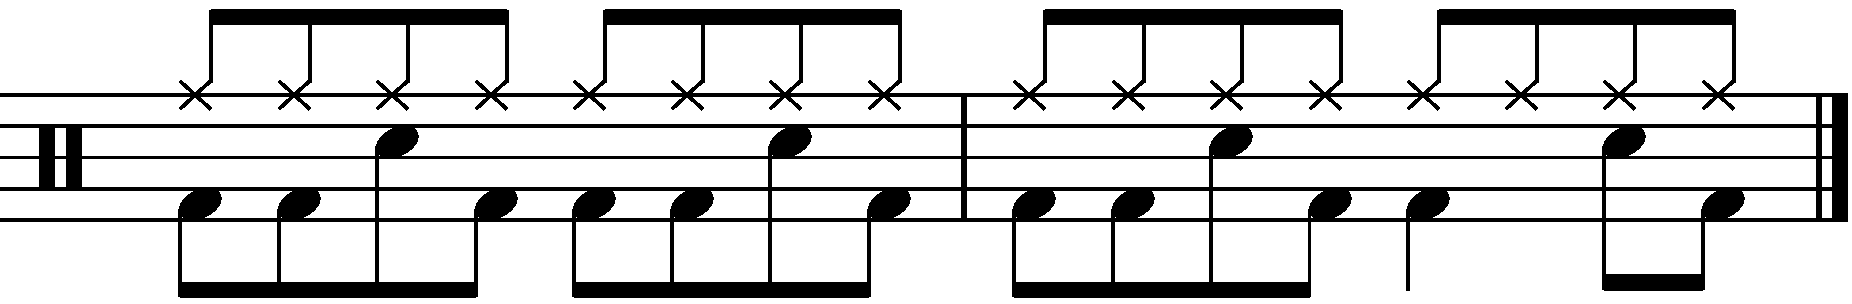 Additional 2 Bar Grooves - 6